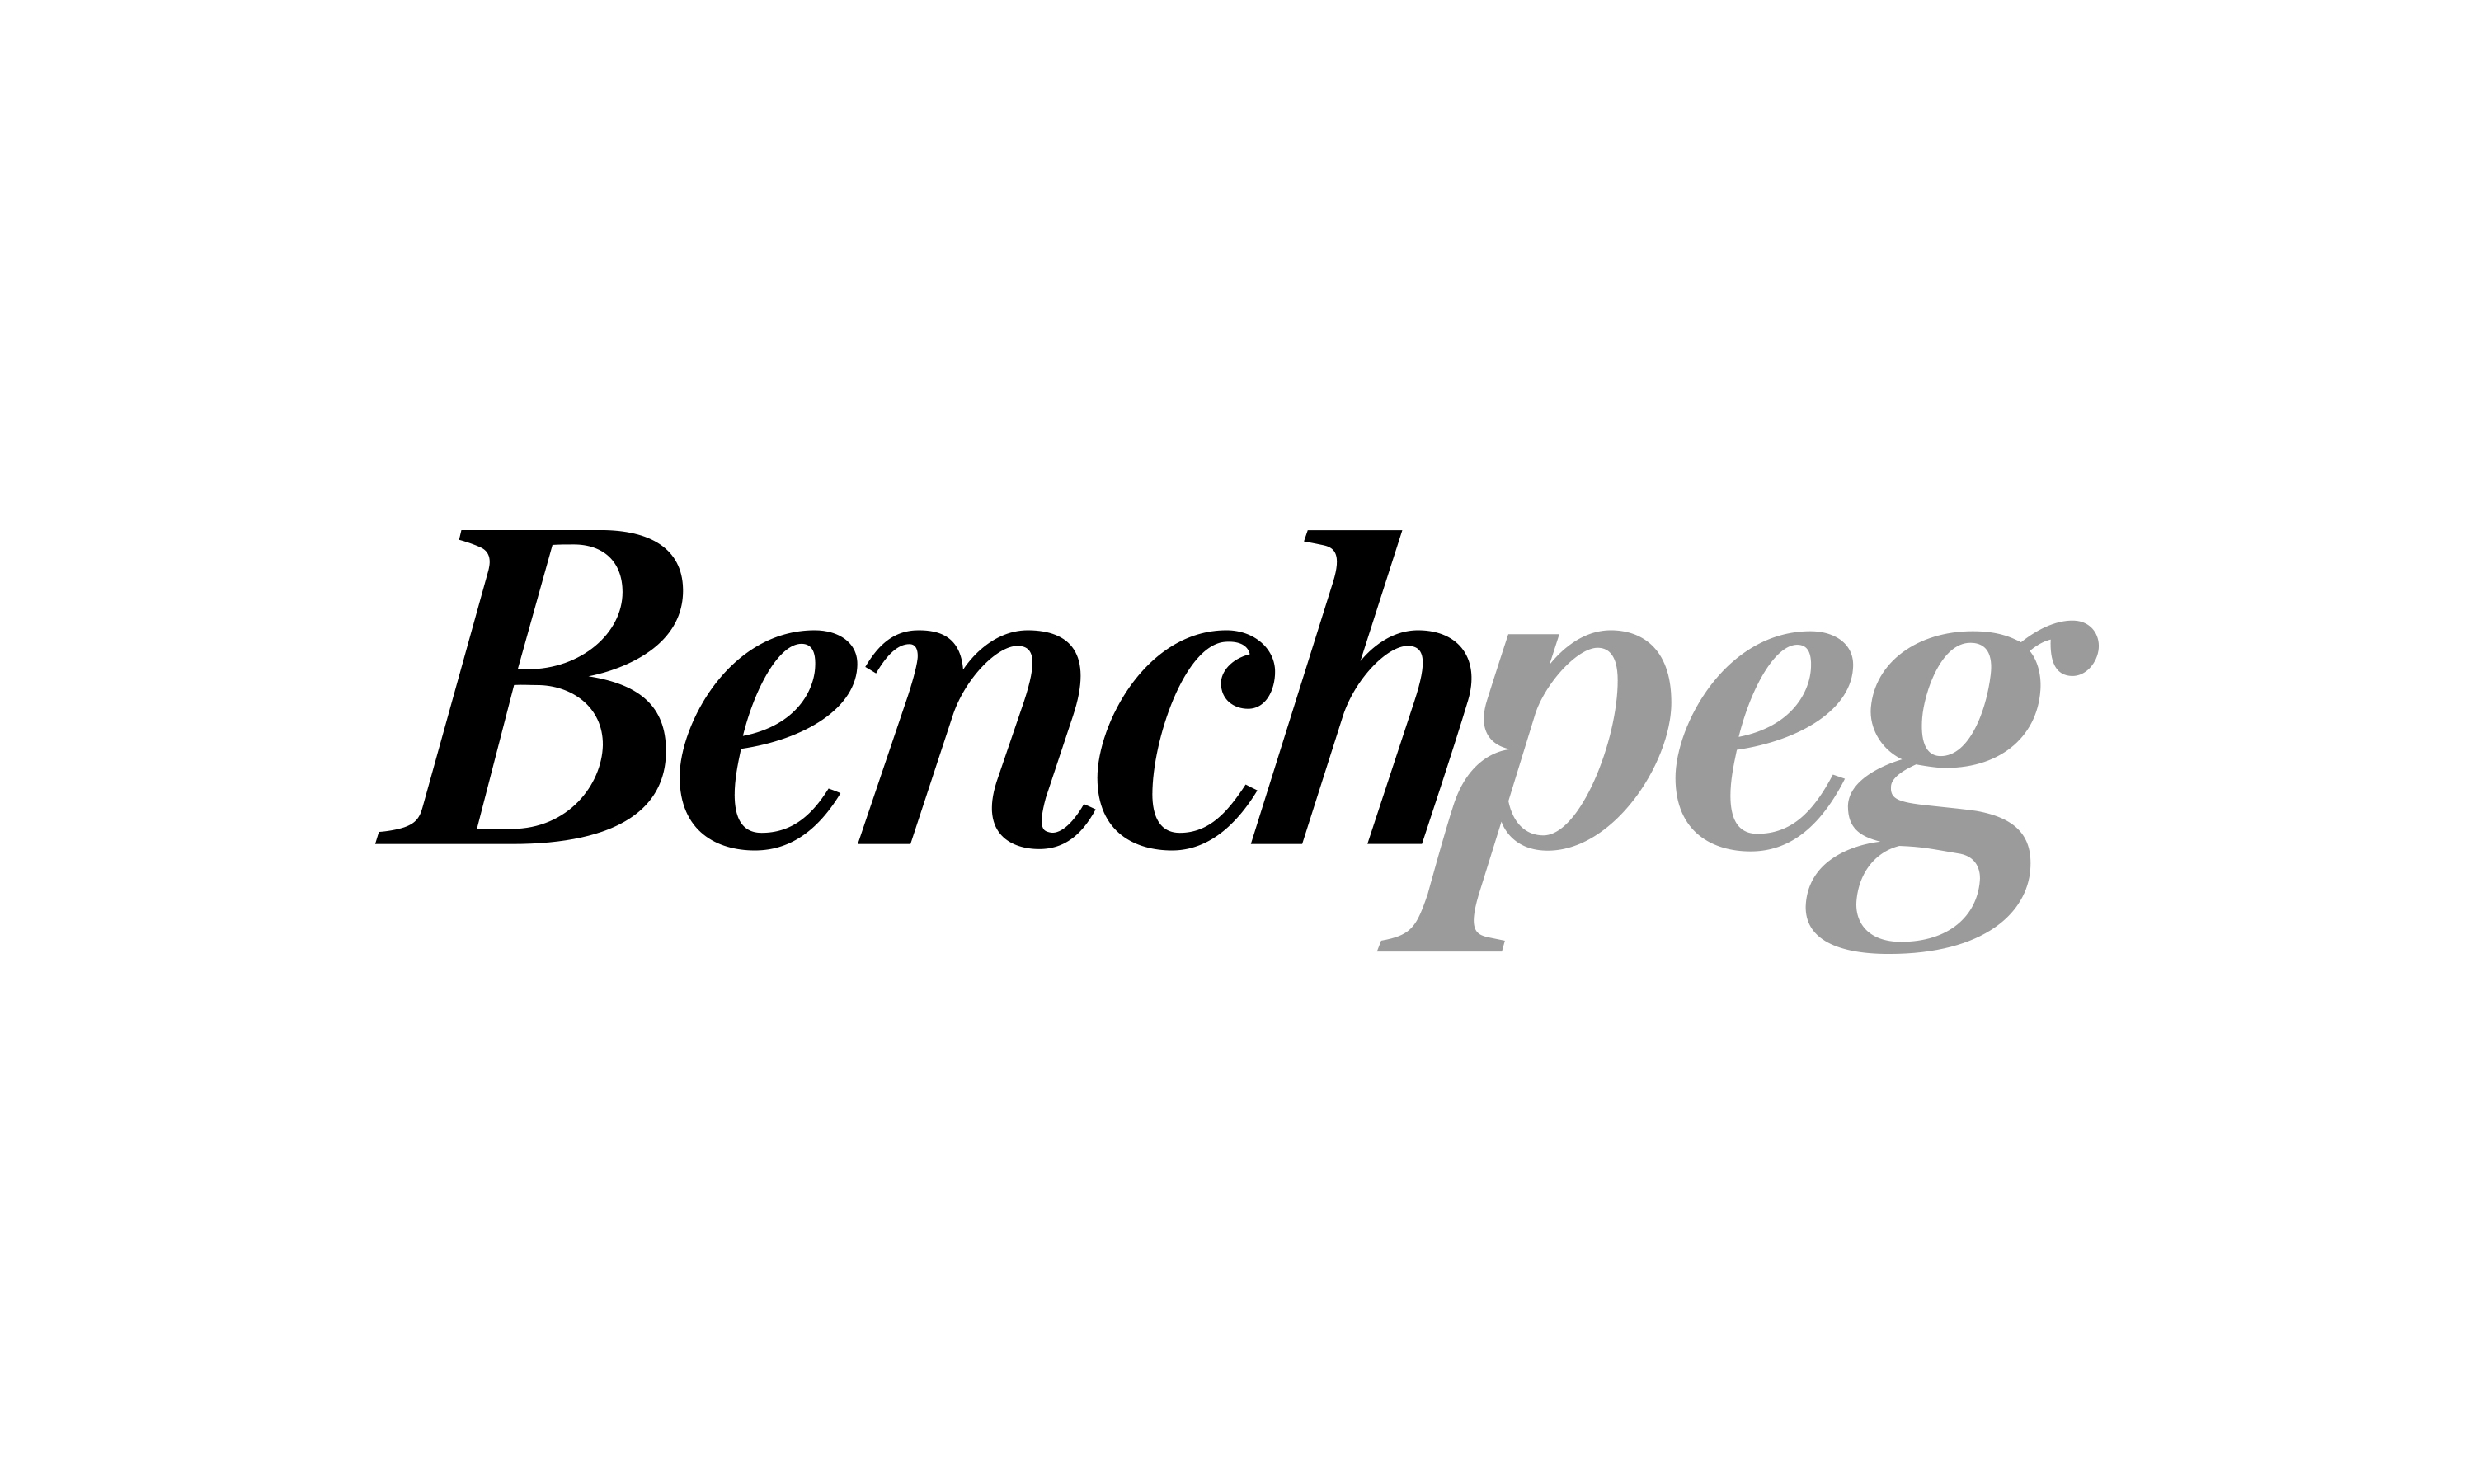 Neon help Benchpeg set a new benchmark with a new brand mark for ...